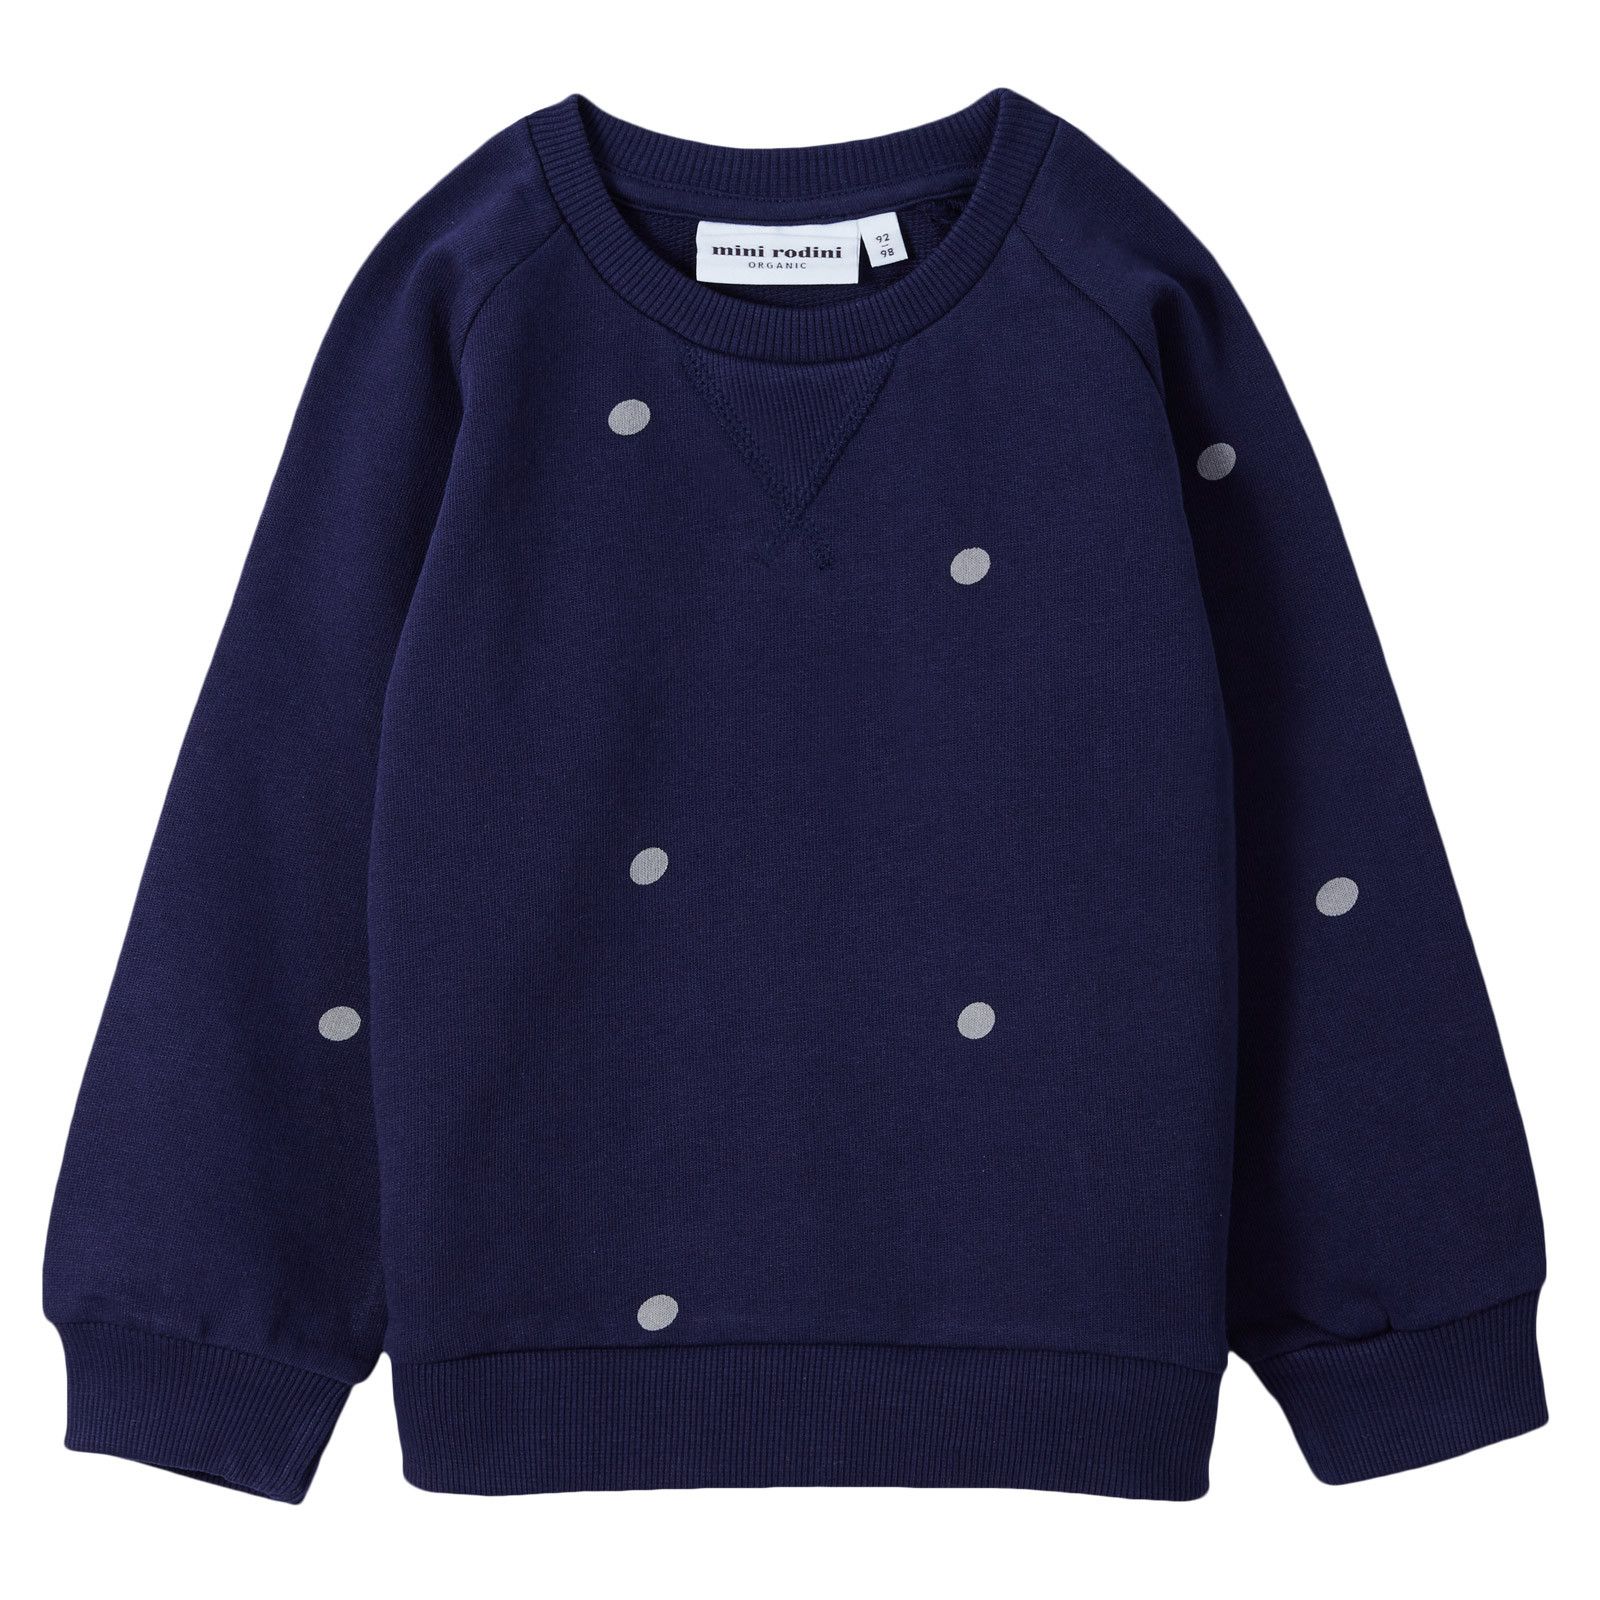 Boys&Girls Navy Blue Sweater With White Speck - CÉMAROSE | Children's Fashion Store - 1